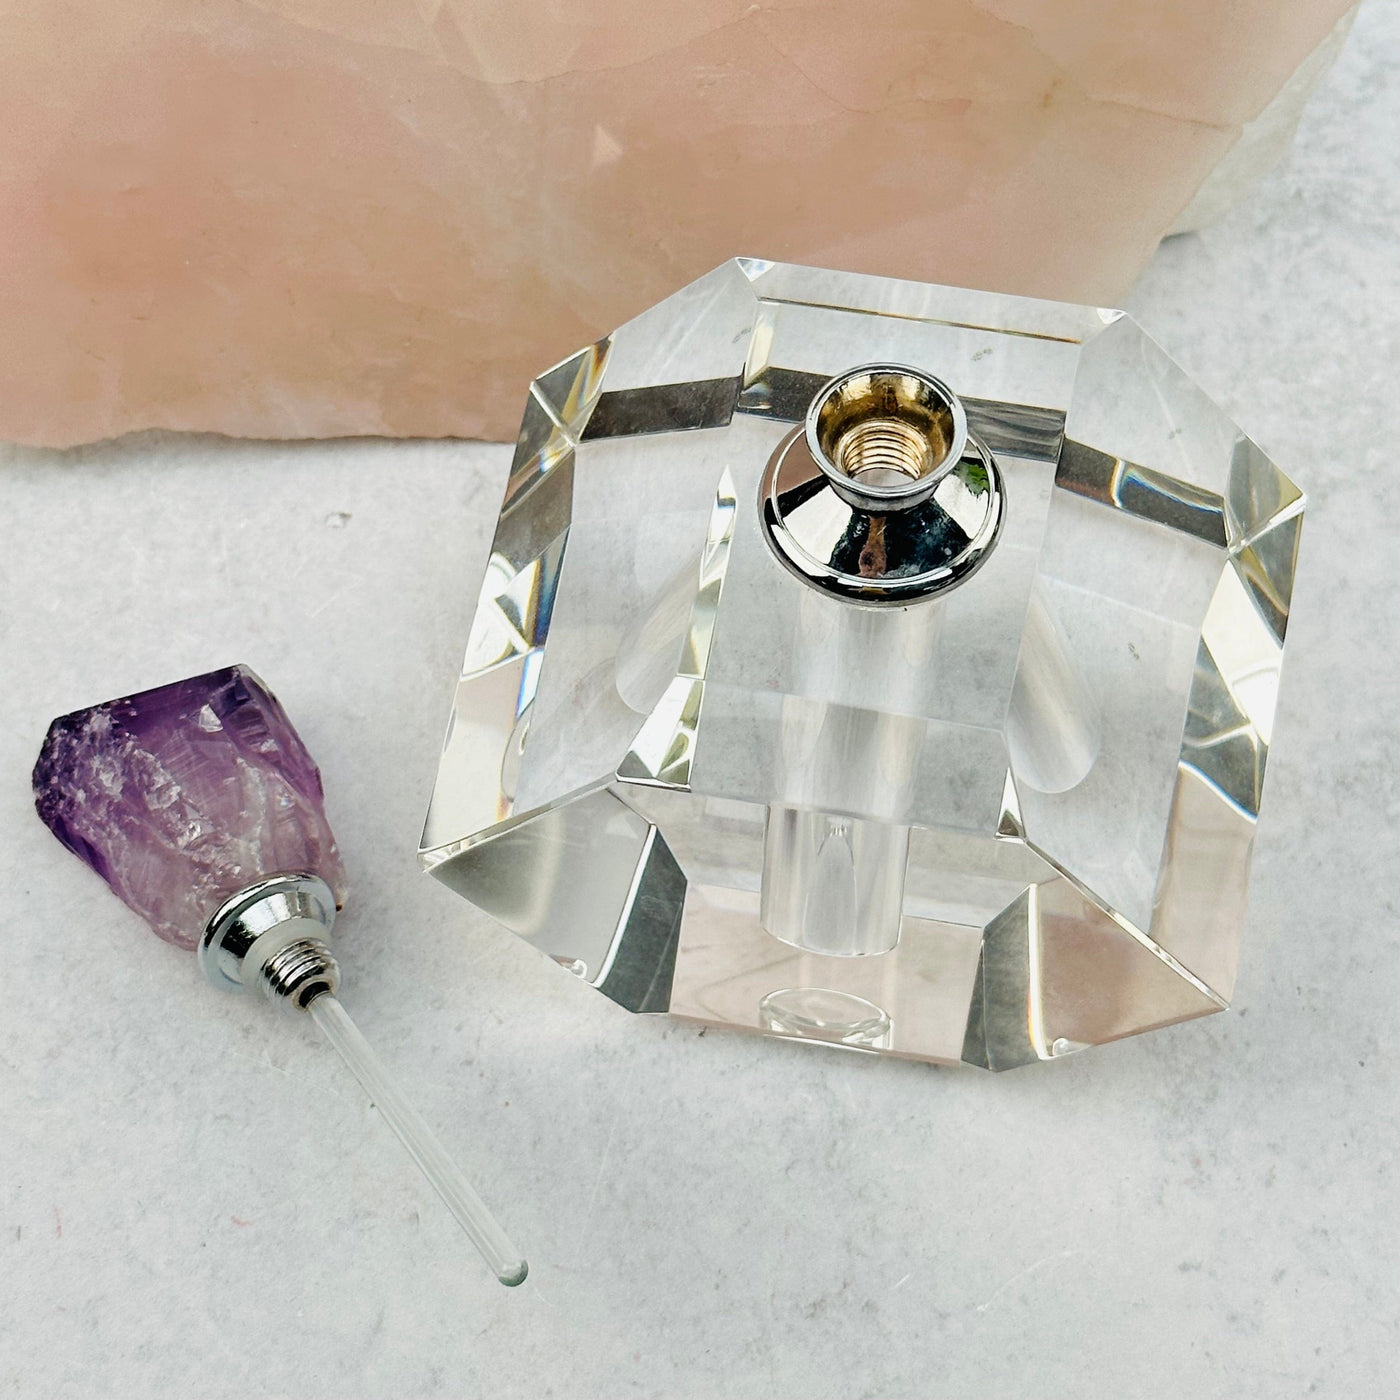 the amethyst top can be unscrewed and filled with your favorite perfume or oil 